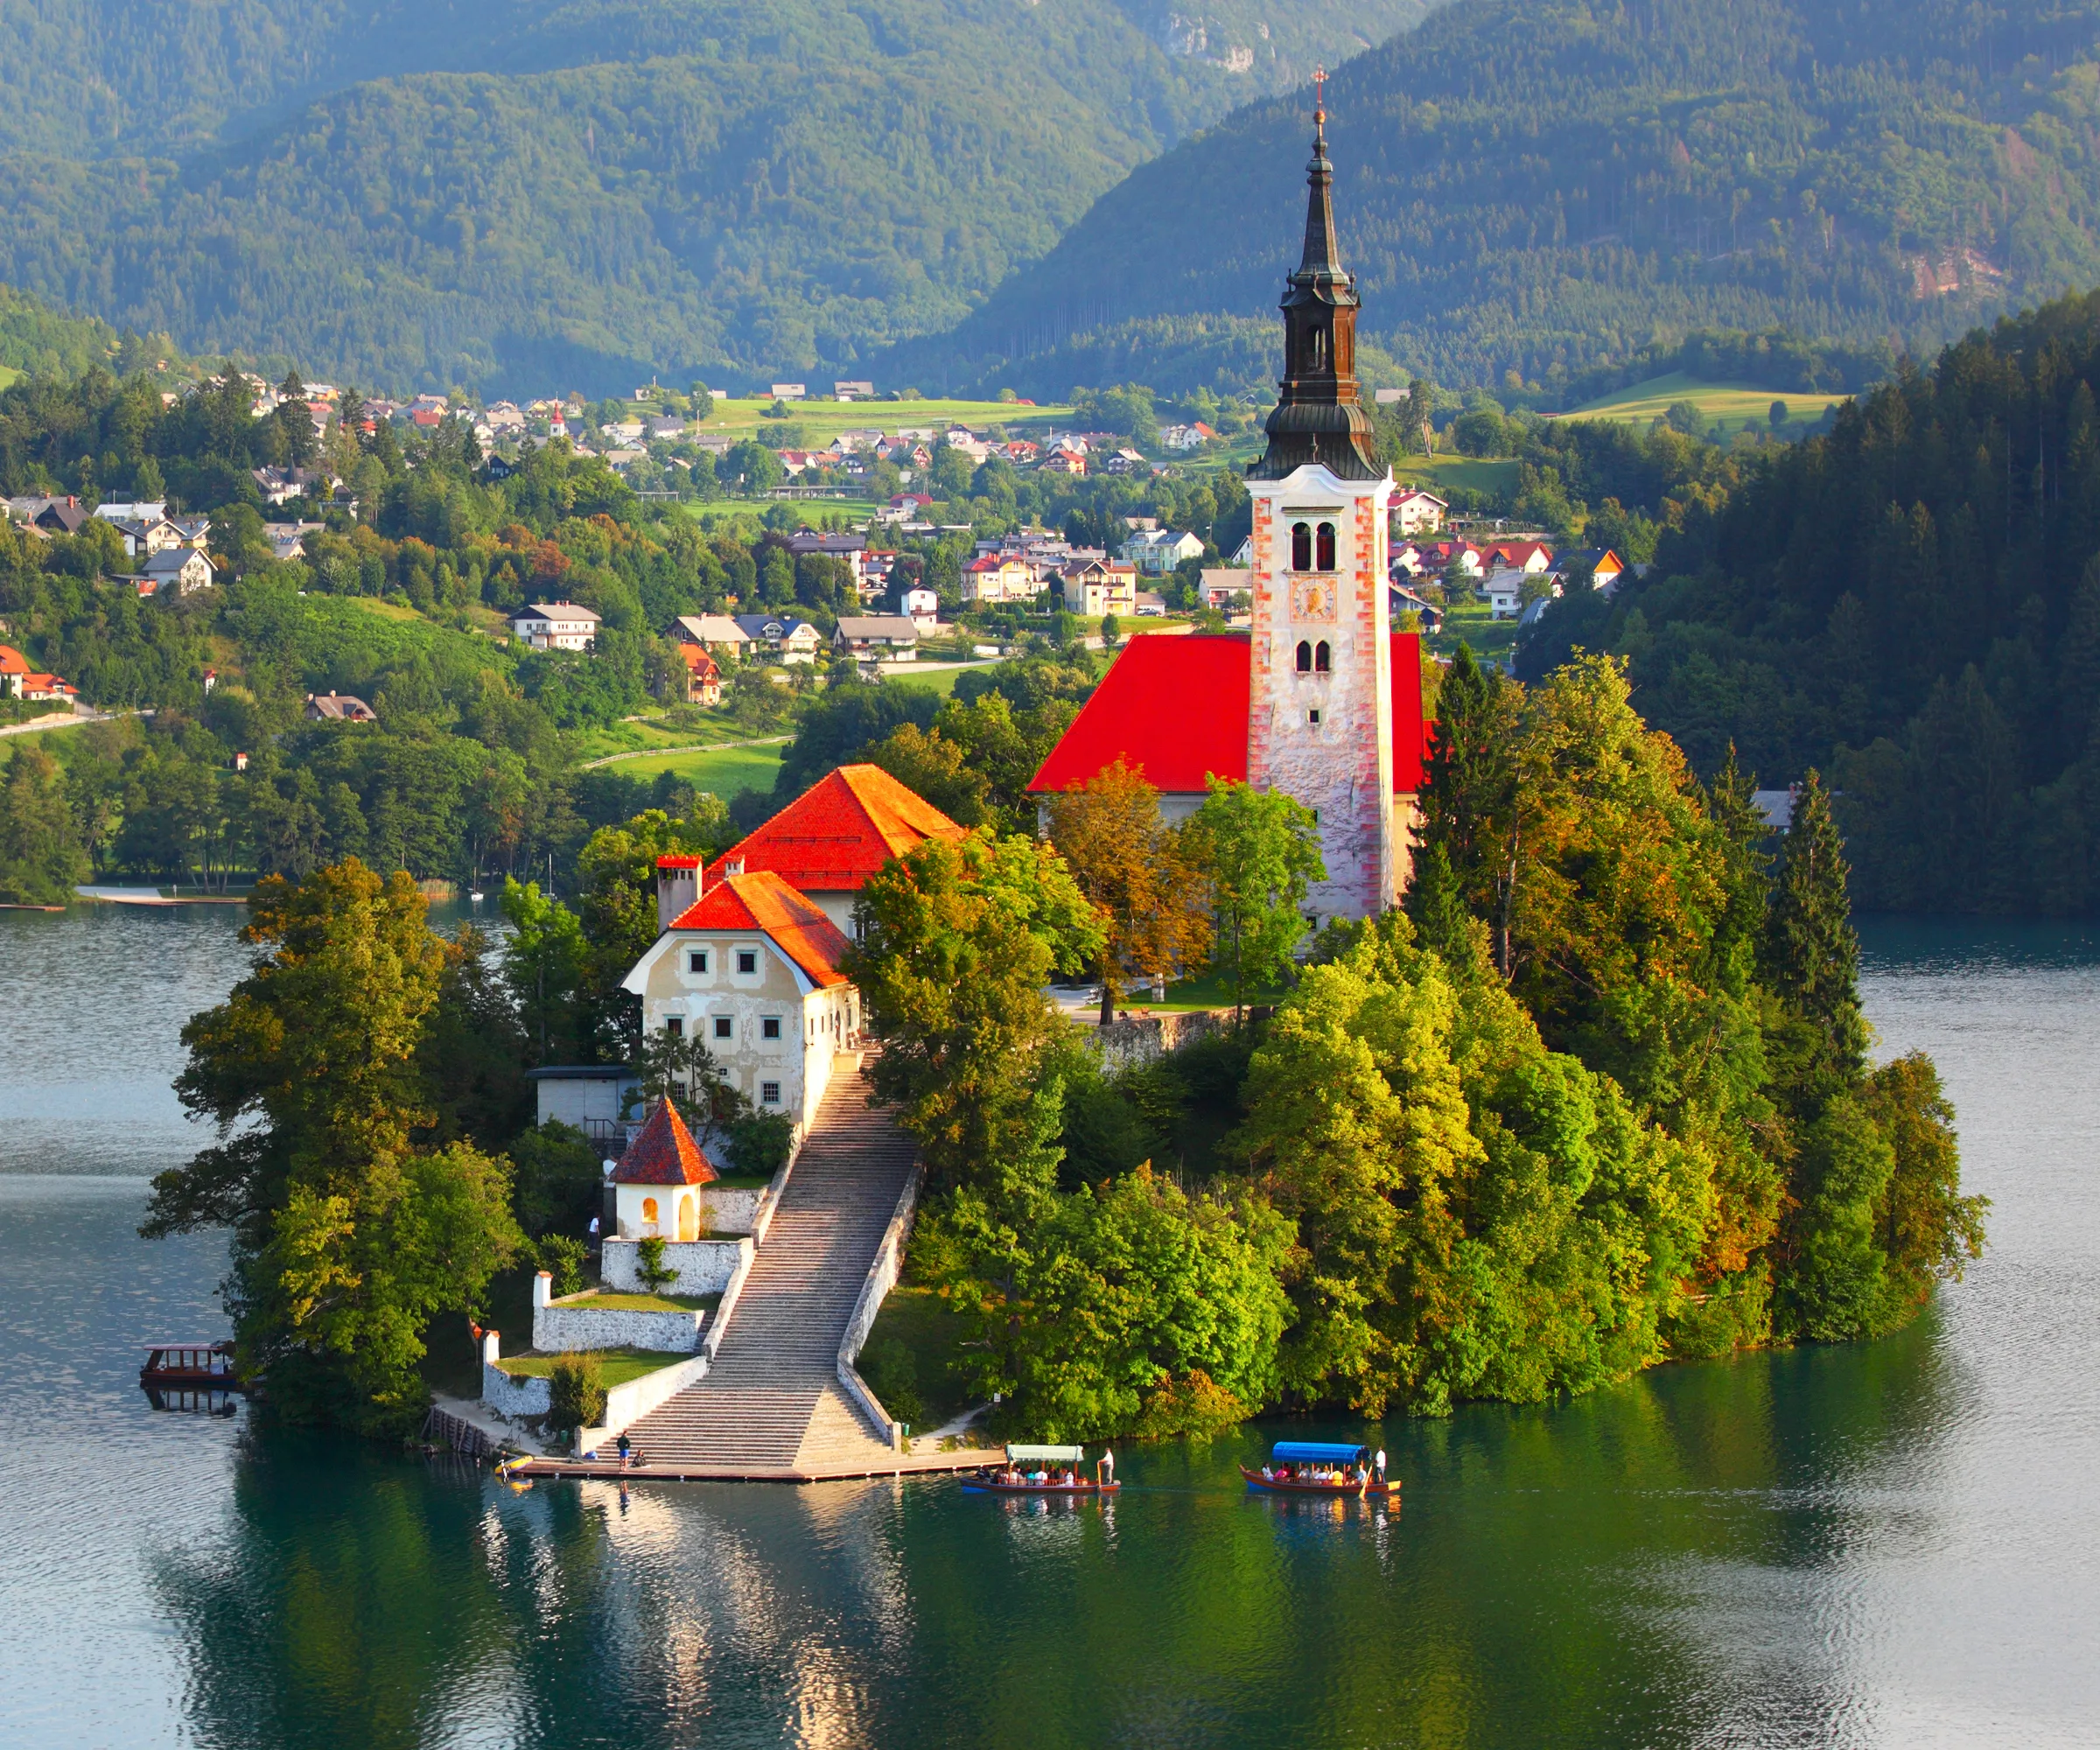 Church-topped island in Lake Bled